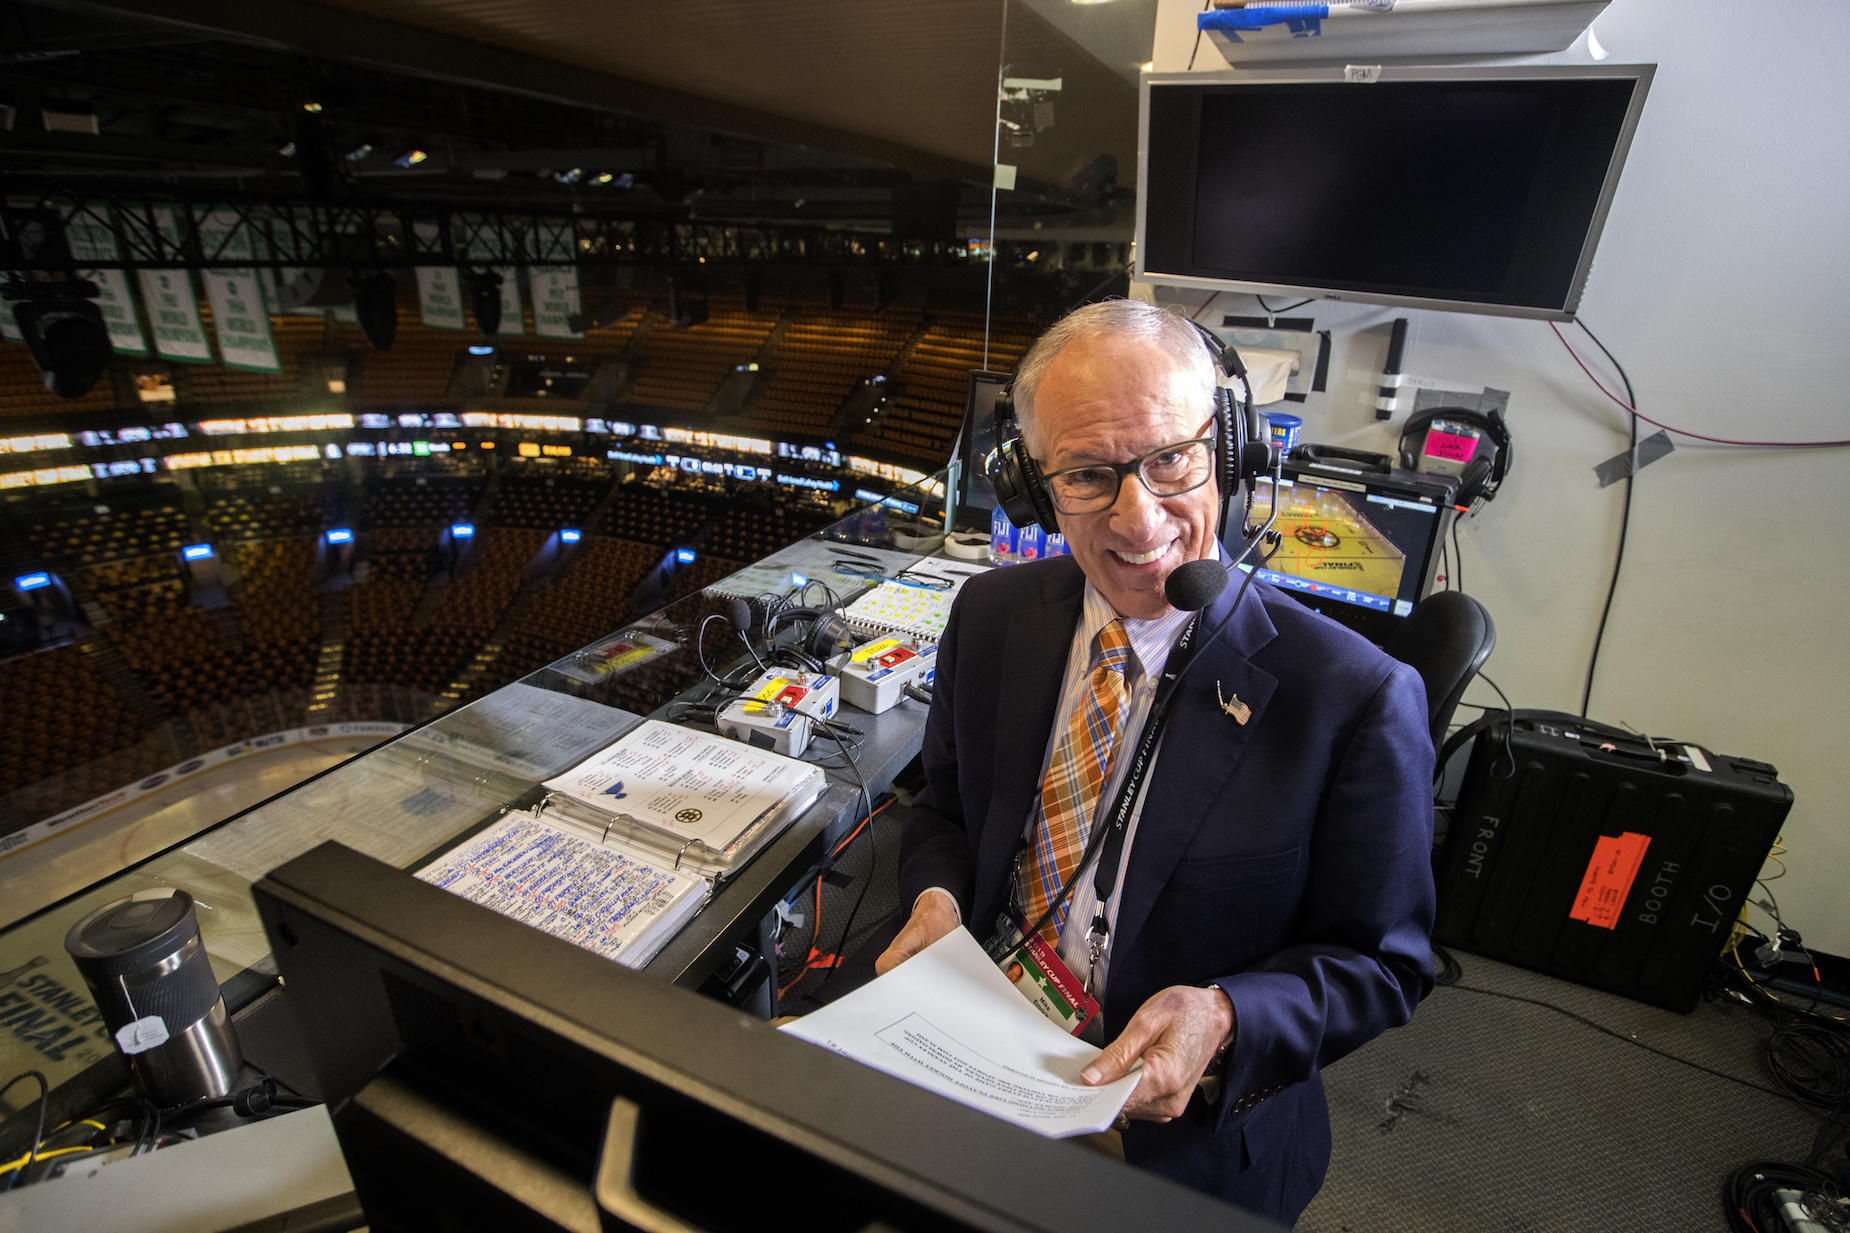 Mike 'Doc' Emrick built up an impressive net worth before retiring from sports broadcasting.